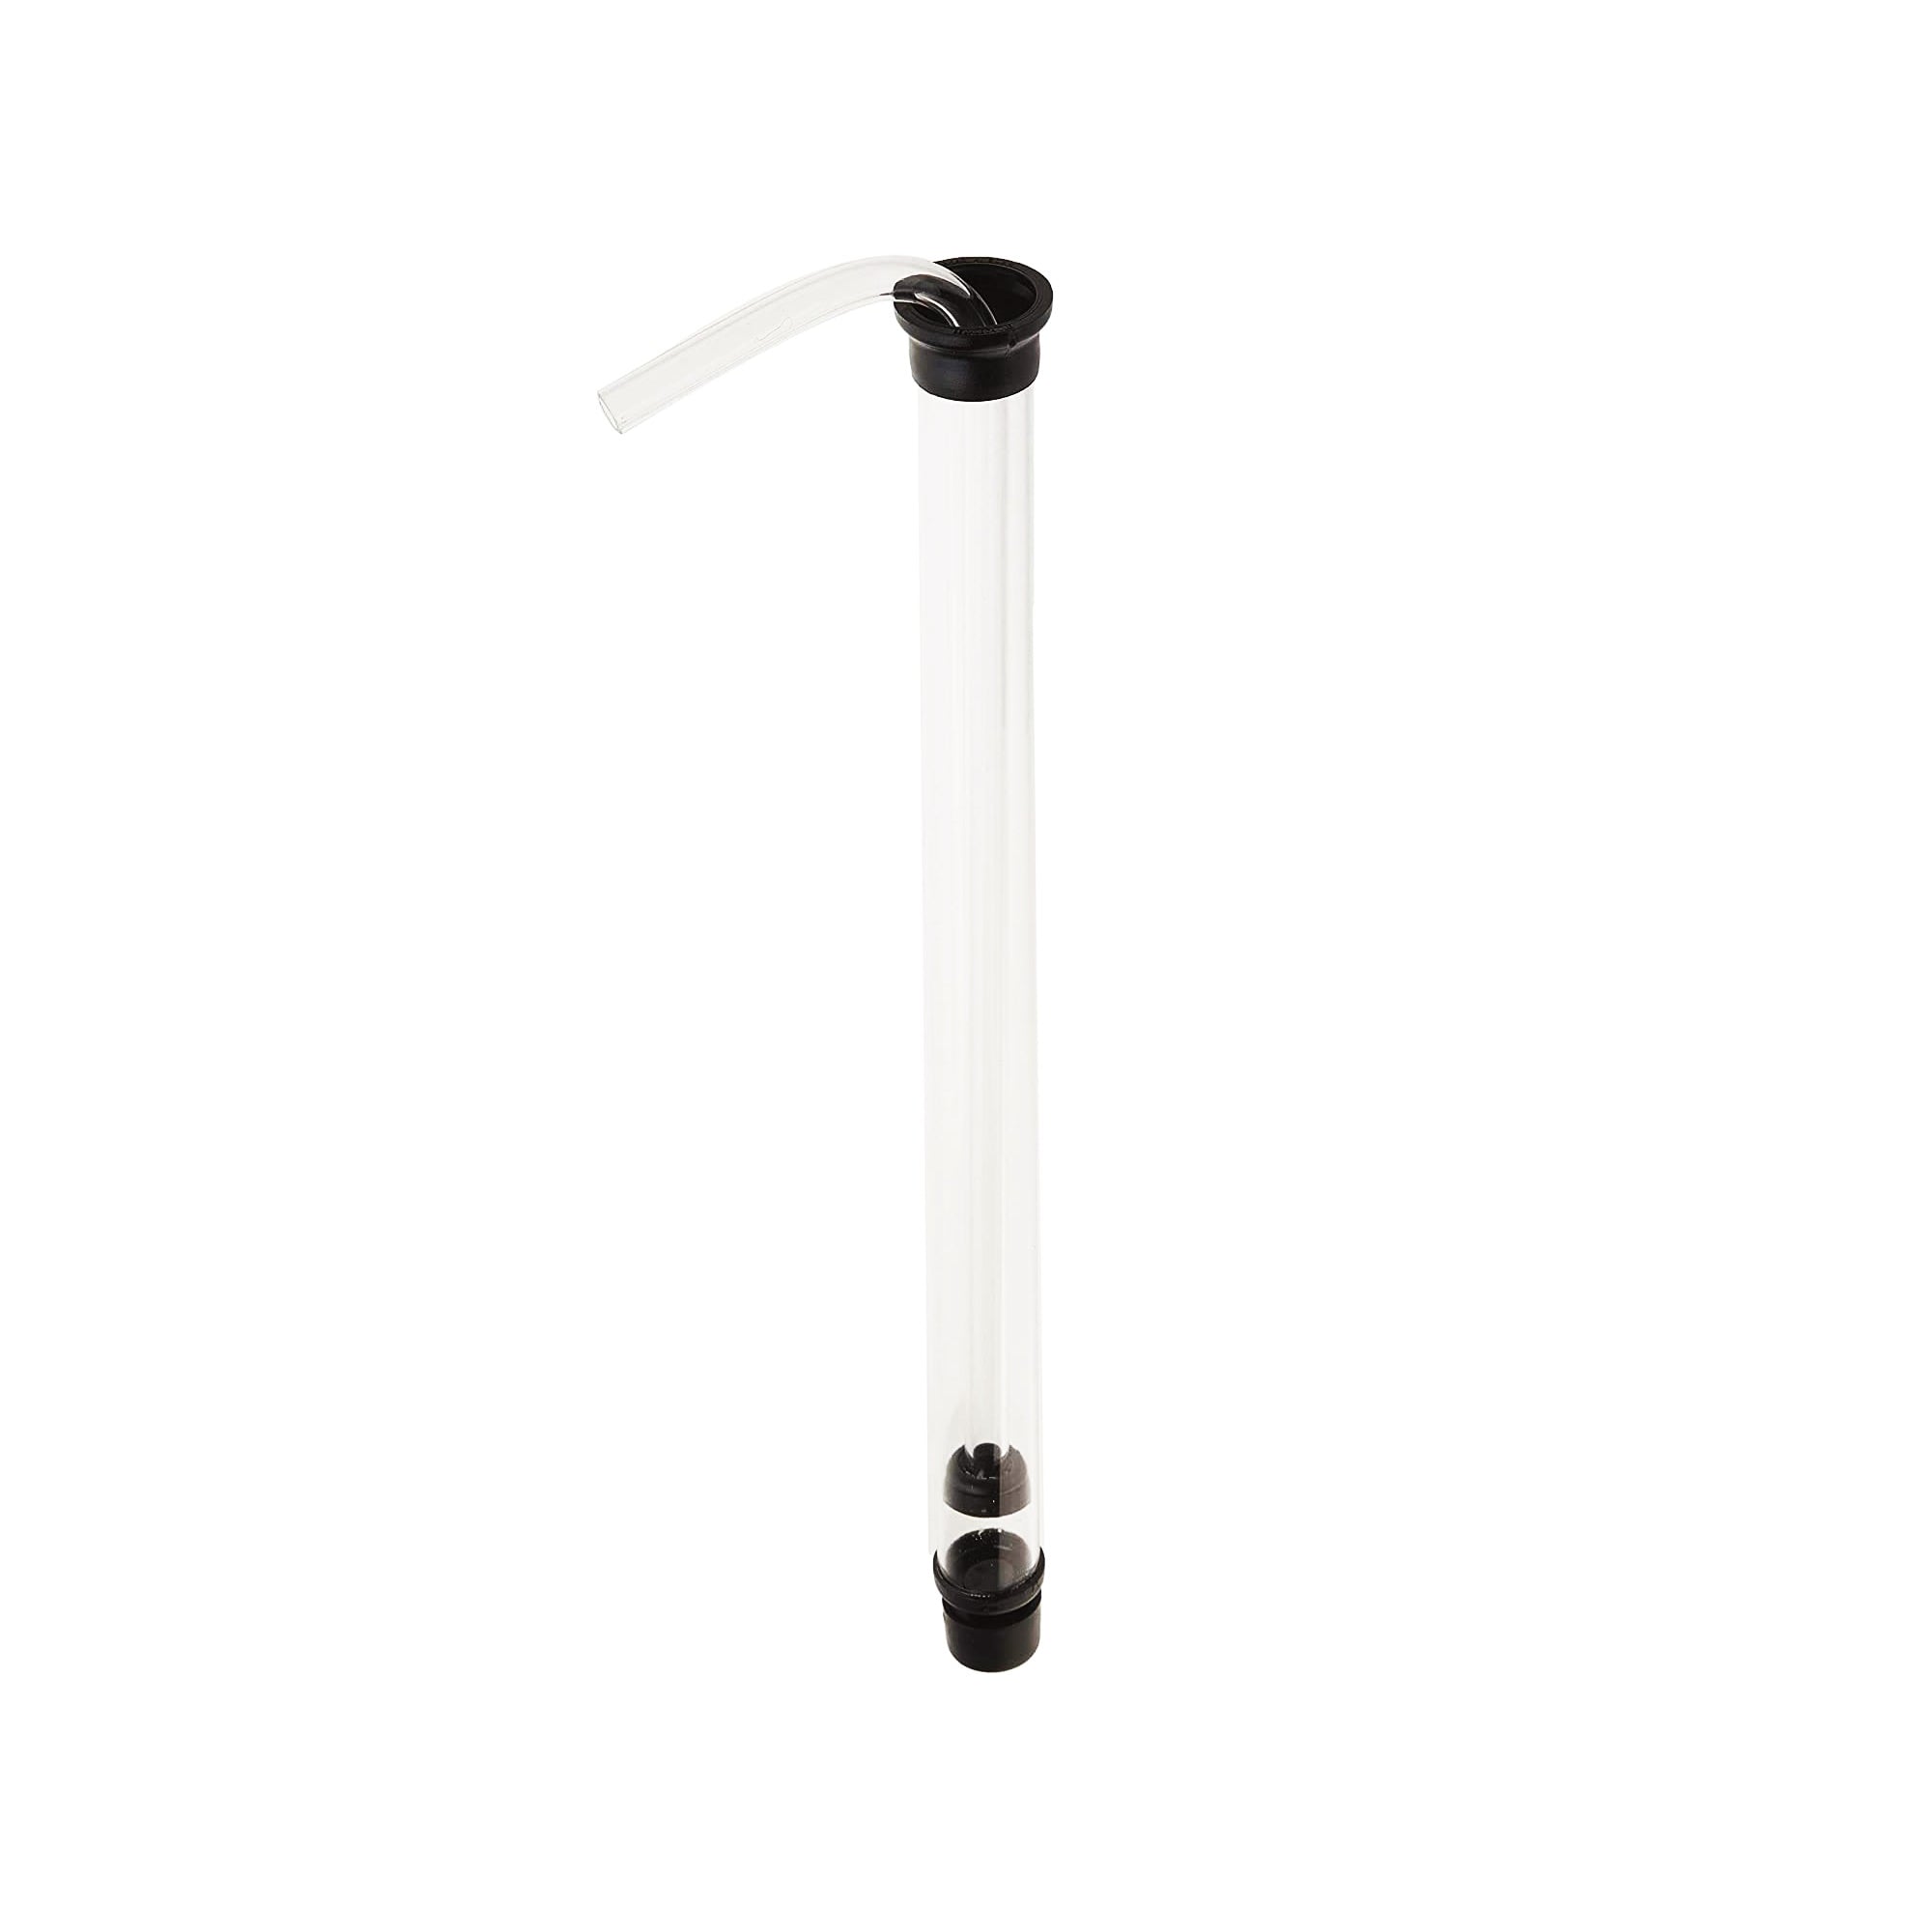 Auto Siphon For Beer - Home Brew Siphon, Craft a Brew